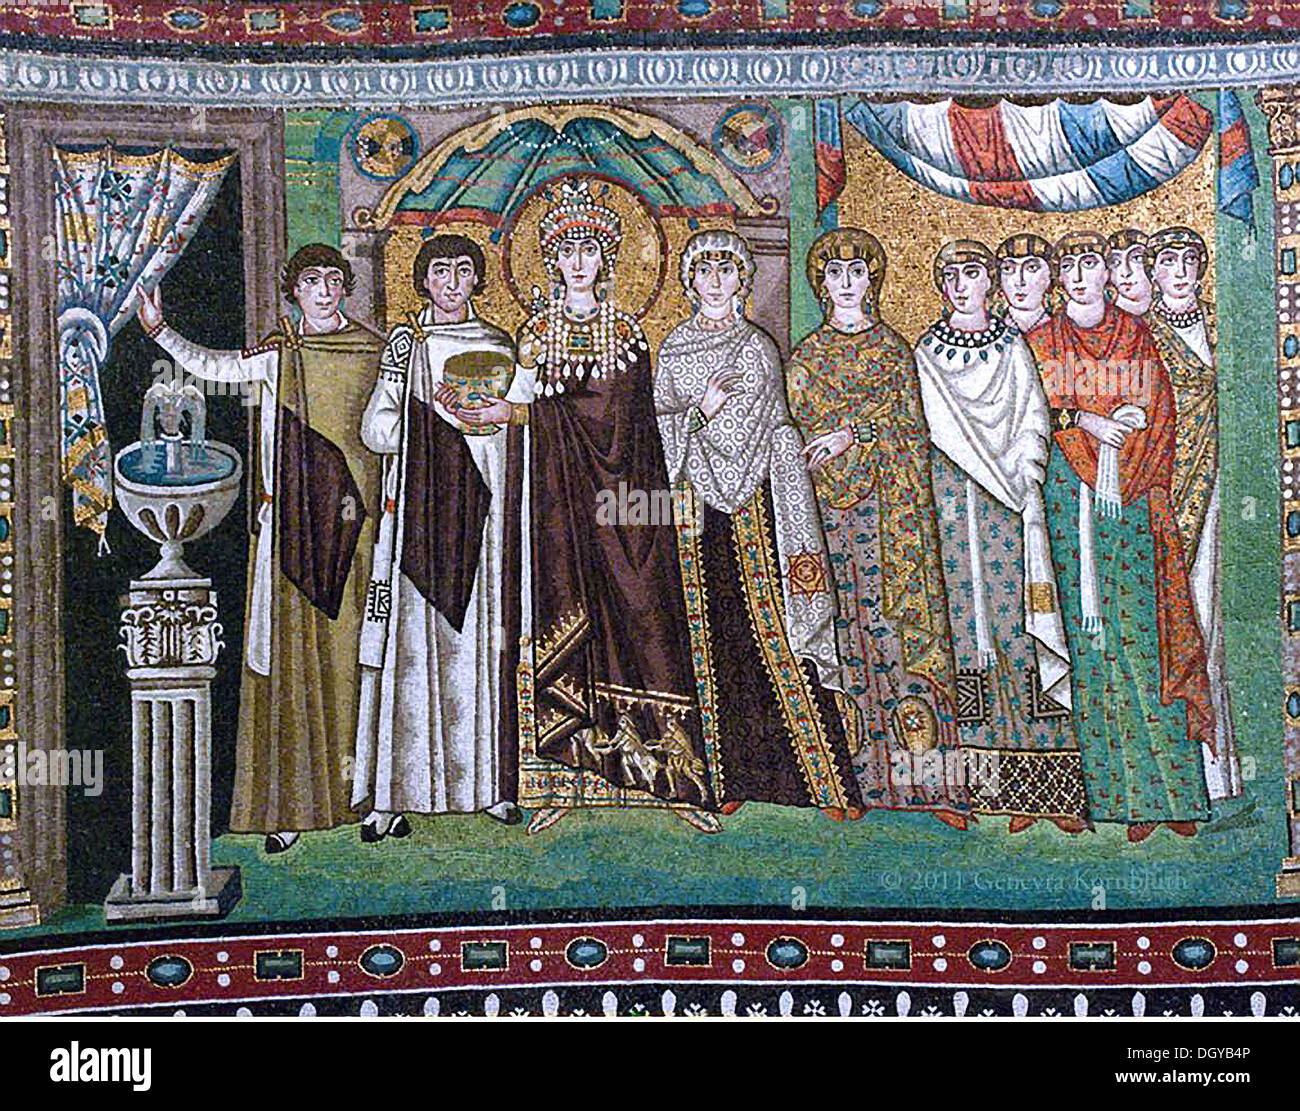 5550. Empress Aelia Eudokia Augusta was born c. 401 in Athens, died 460. She was the wife of Emperor Theodosius II of Byzantium.Mozaic from Ravena shows the Empress with her Byzantine court. Stock Photo